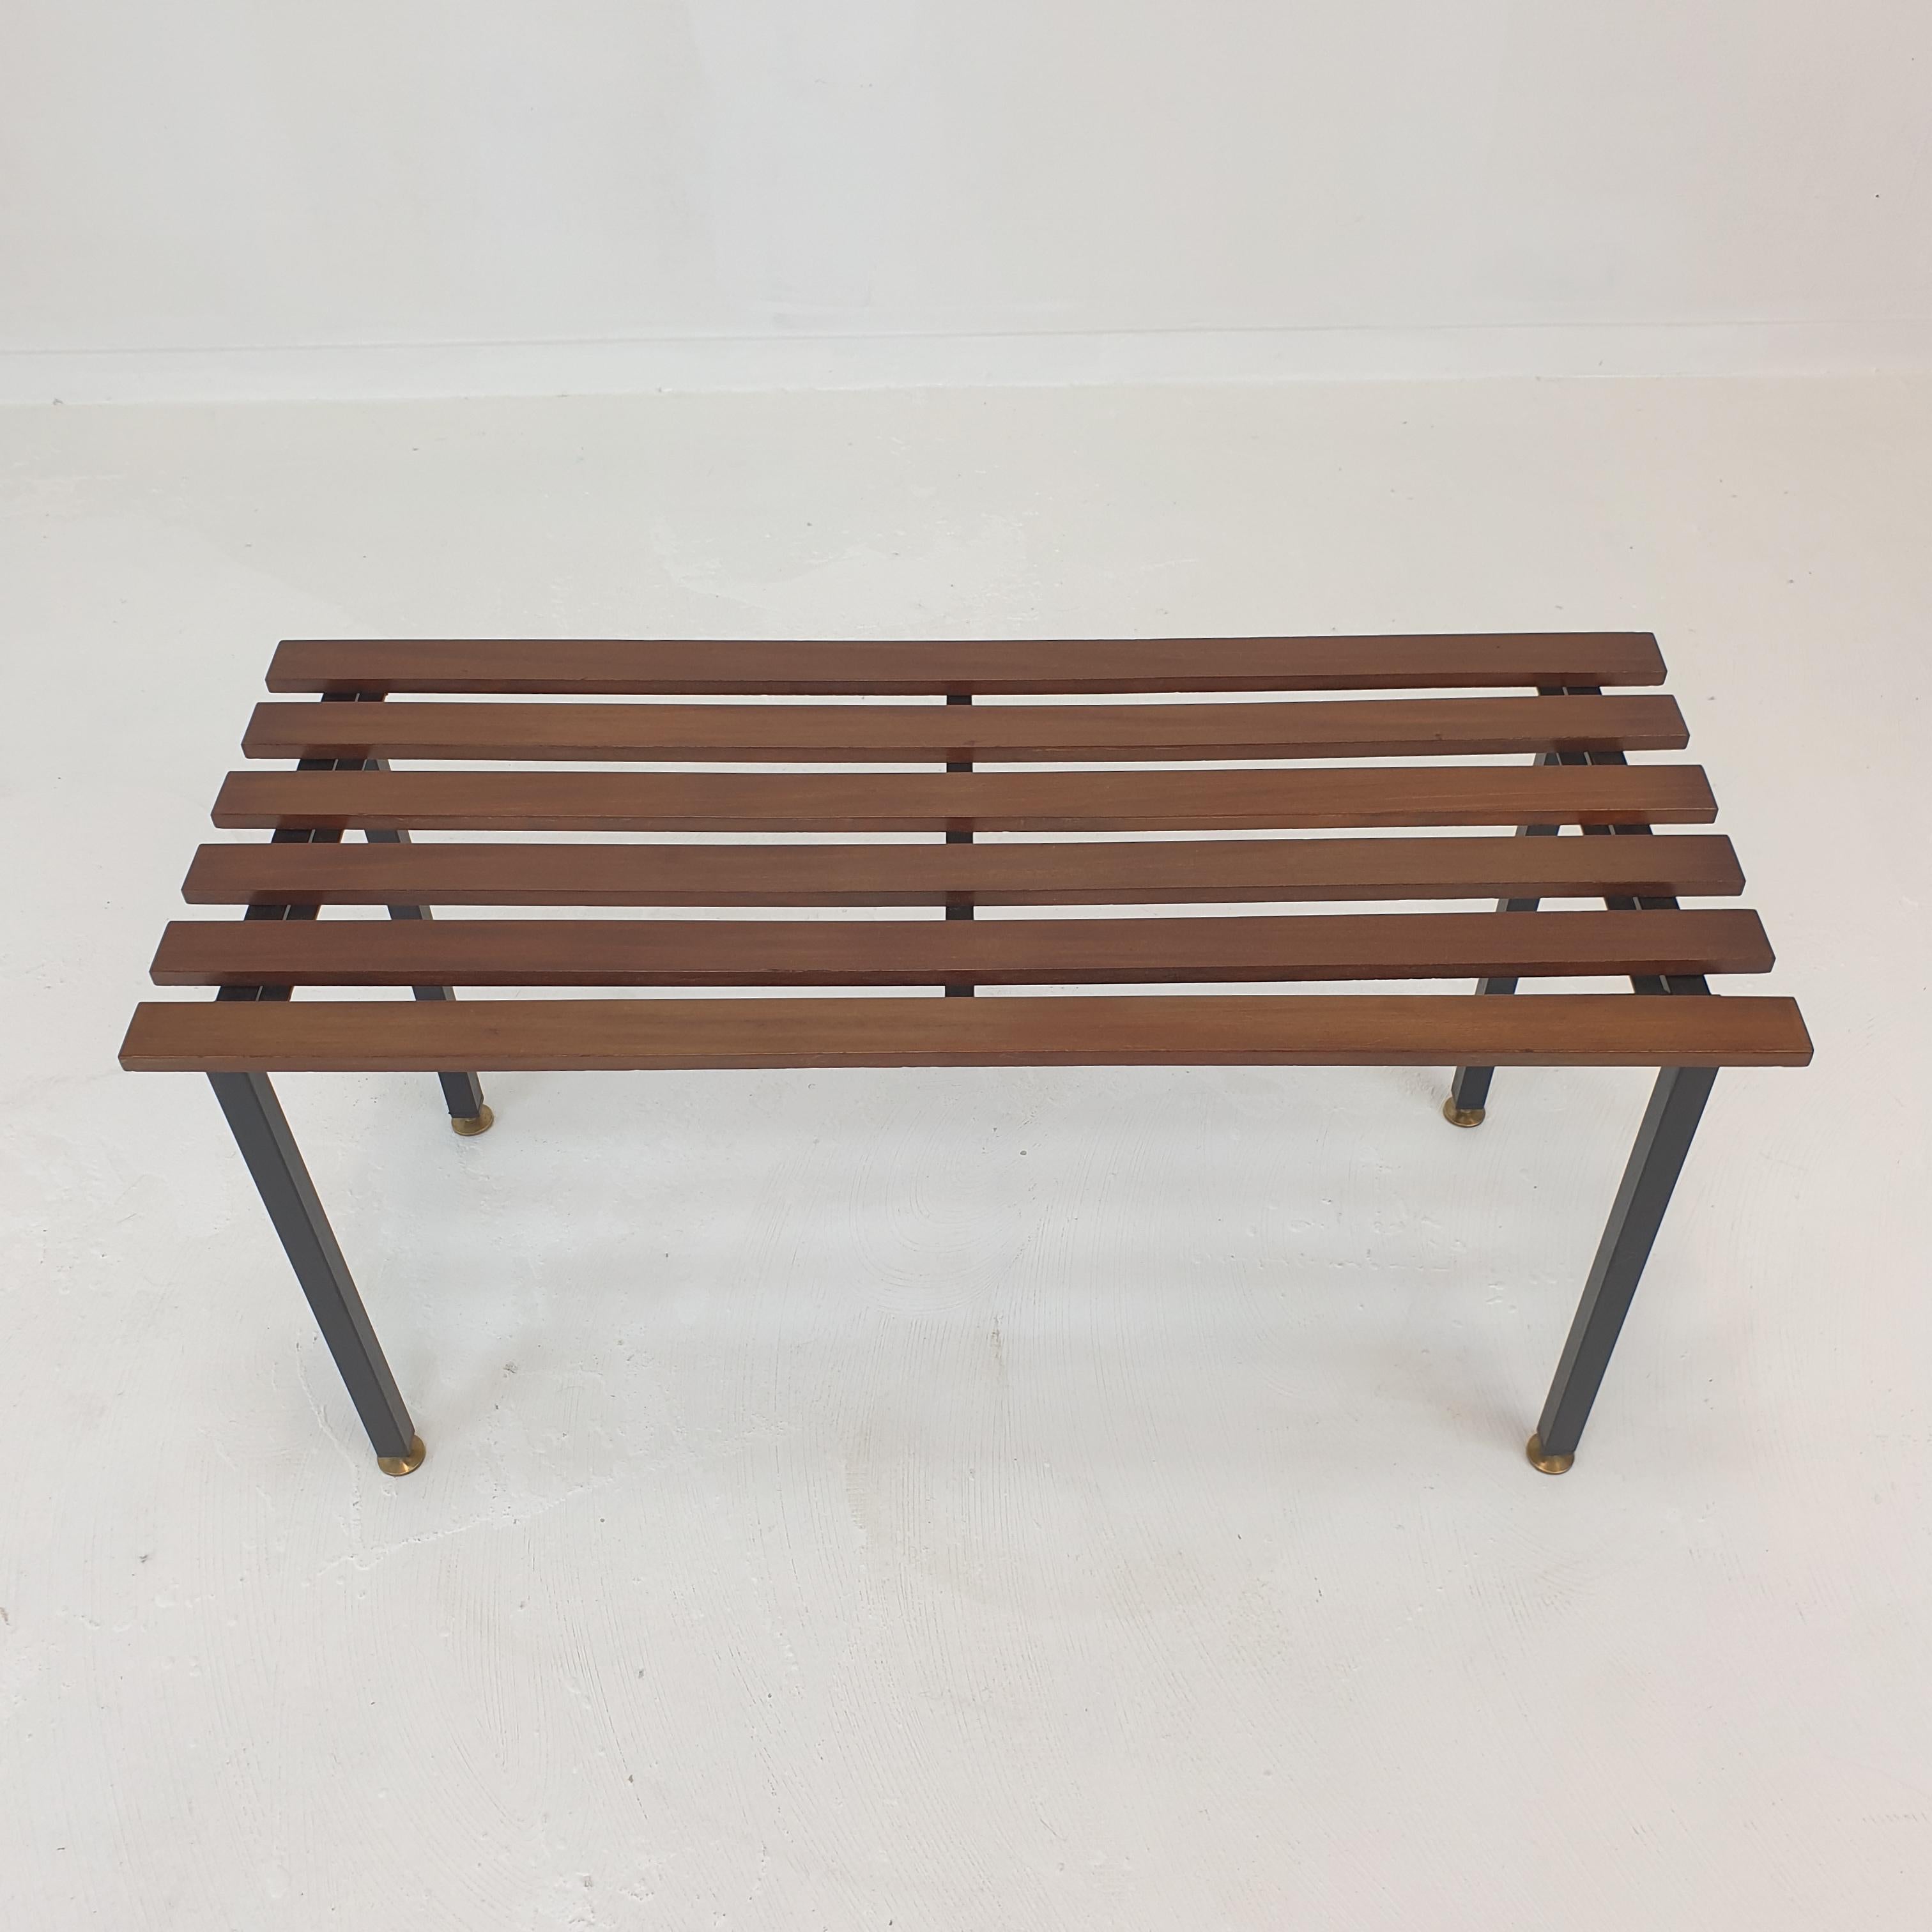 Italian Mid-Century Bench in Teak with Brass Feet, Italy, 1950s For Sale